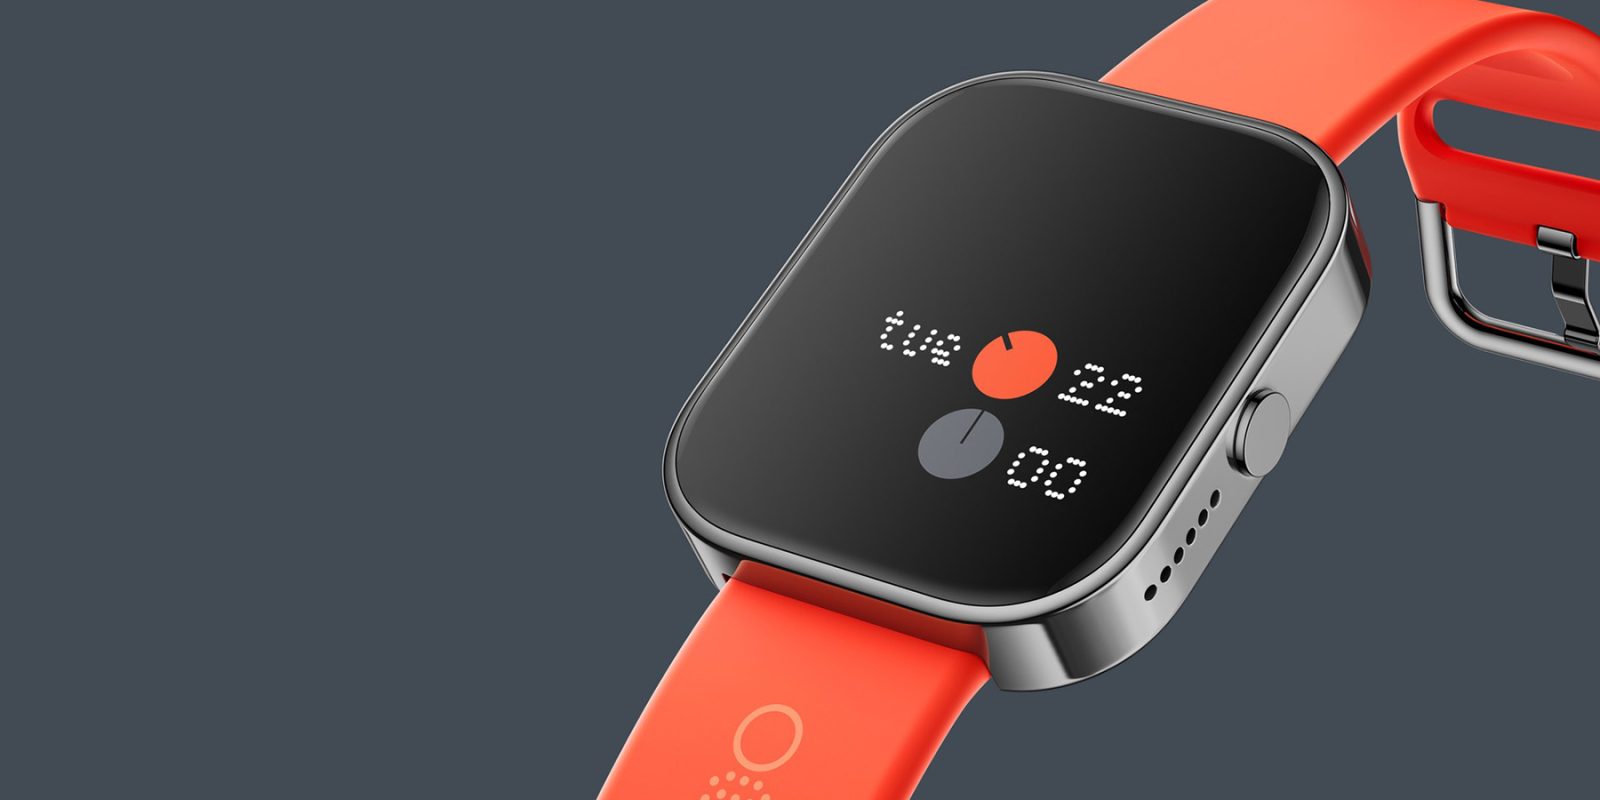 CMF Watch Pro: Nothing unveils first smartwatch with AMOLED